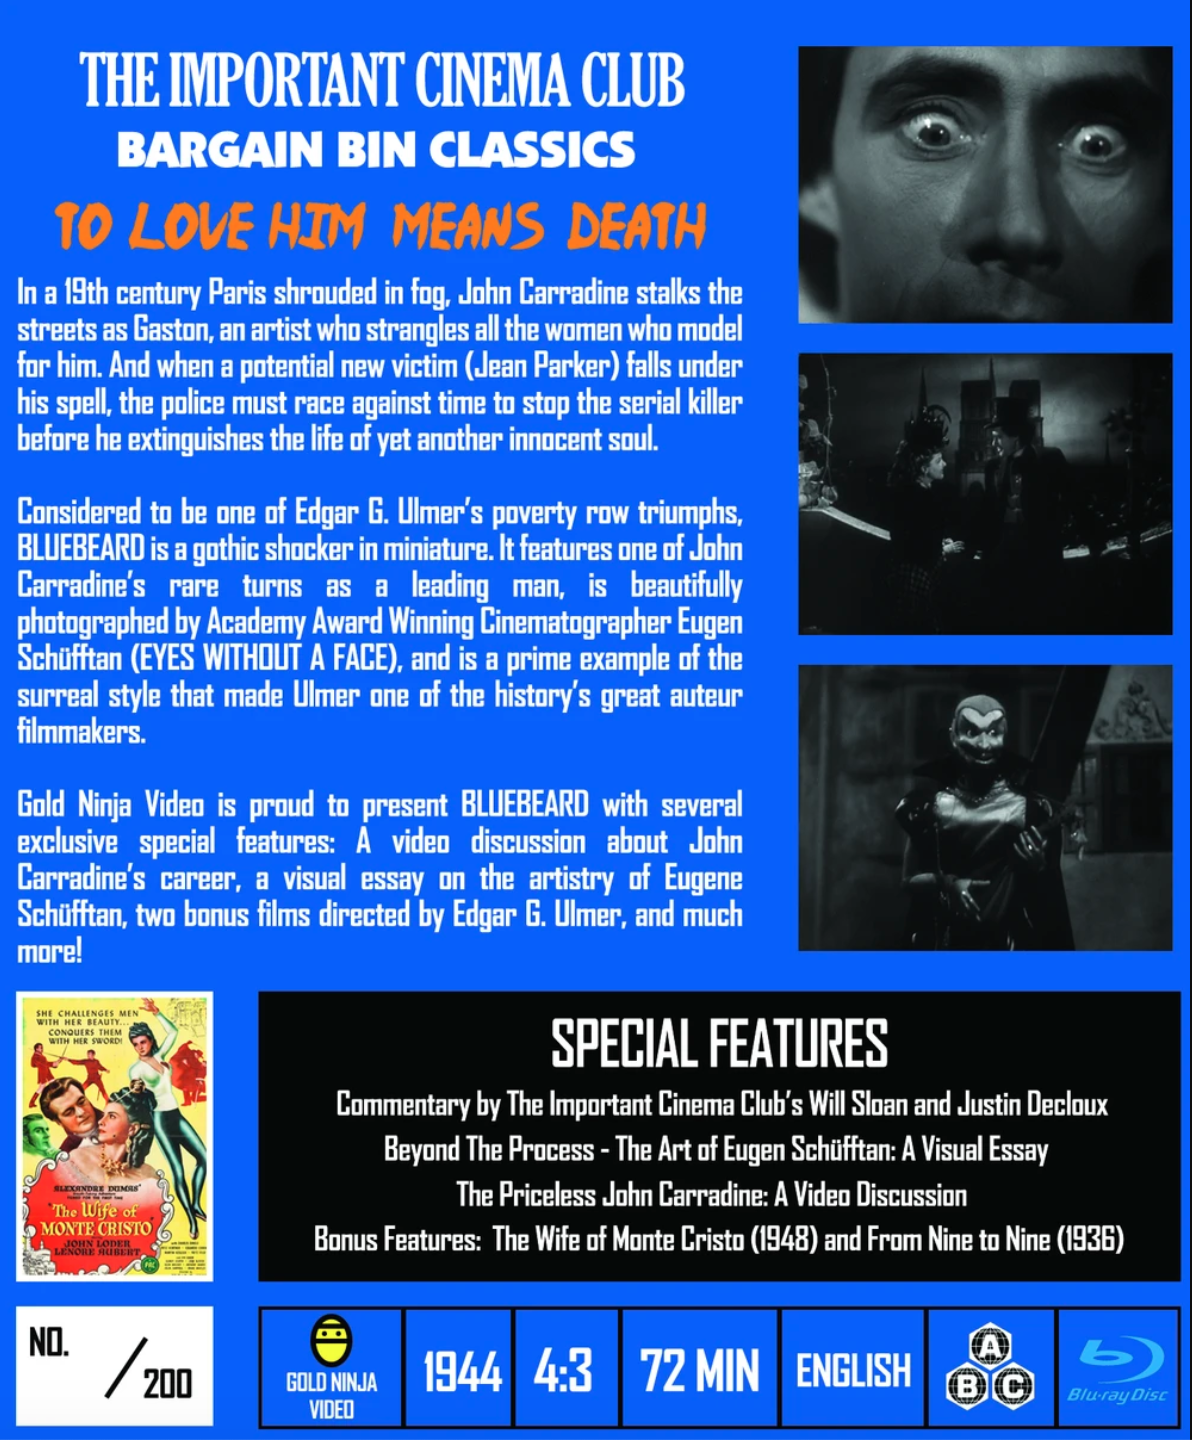 Will Sloan The Important Cinema Club Bargain Bin Classics The Criterion Of Public Domain Returns With Edgar G Ulmer S Bluebeard Commentary By Me And Declouxj Featurettes On